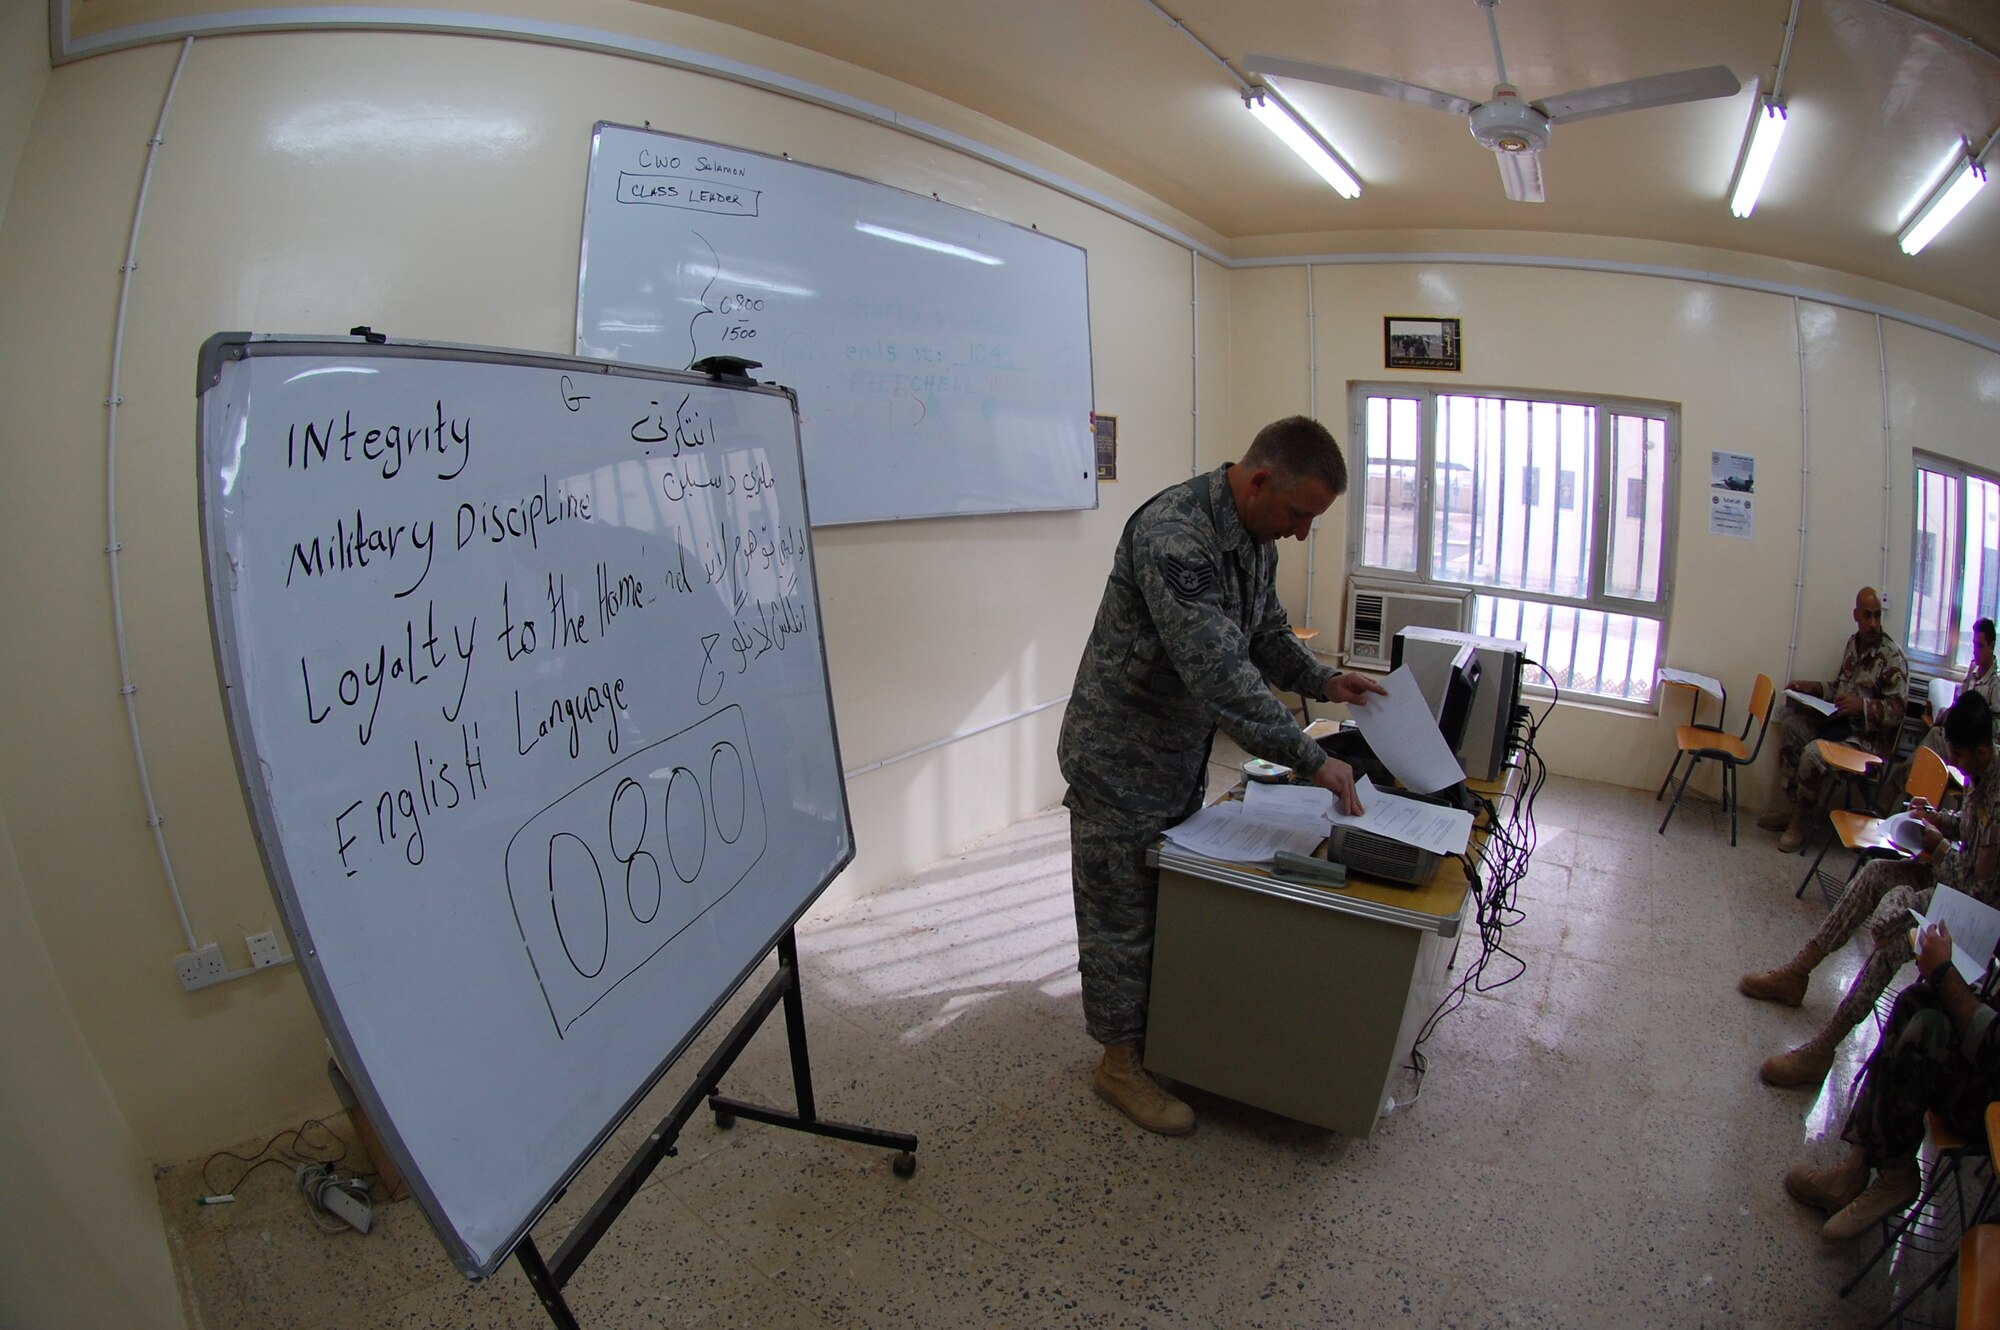 Tech. Sgt. Rick Dunaway, 821st Expeditionary Training Squadron Iraqi warrant officer professional development course instructor, prepares to hand out the final test to his Iraqi students March 28. Twenty-nine Iraqi warrant officers completed the seven-day course where they were taught lessons on discipline, leader influence, teamwork and development, ethics and values, Law of Armed Conflict and problem solving. Sergeant Dunaway is deployed from Maxwell-Gunter Air Force Base, Ala., and is a native of Russellville, Ark. (U.S. Air Force photo by Staff Sgt. Tim Beckham)